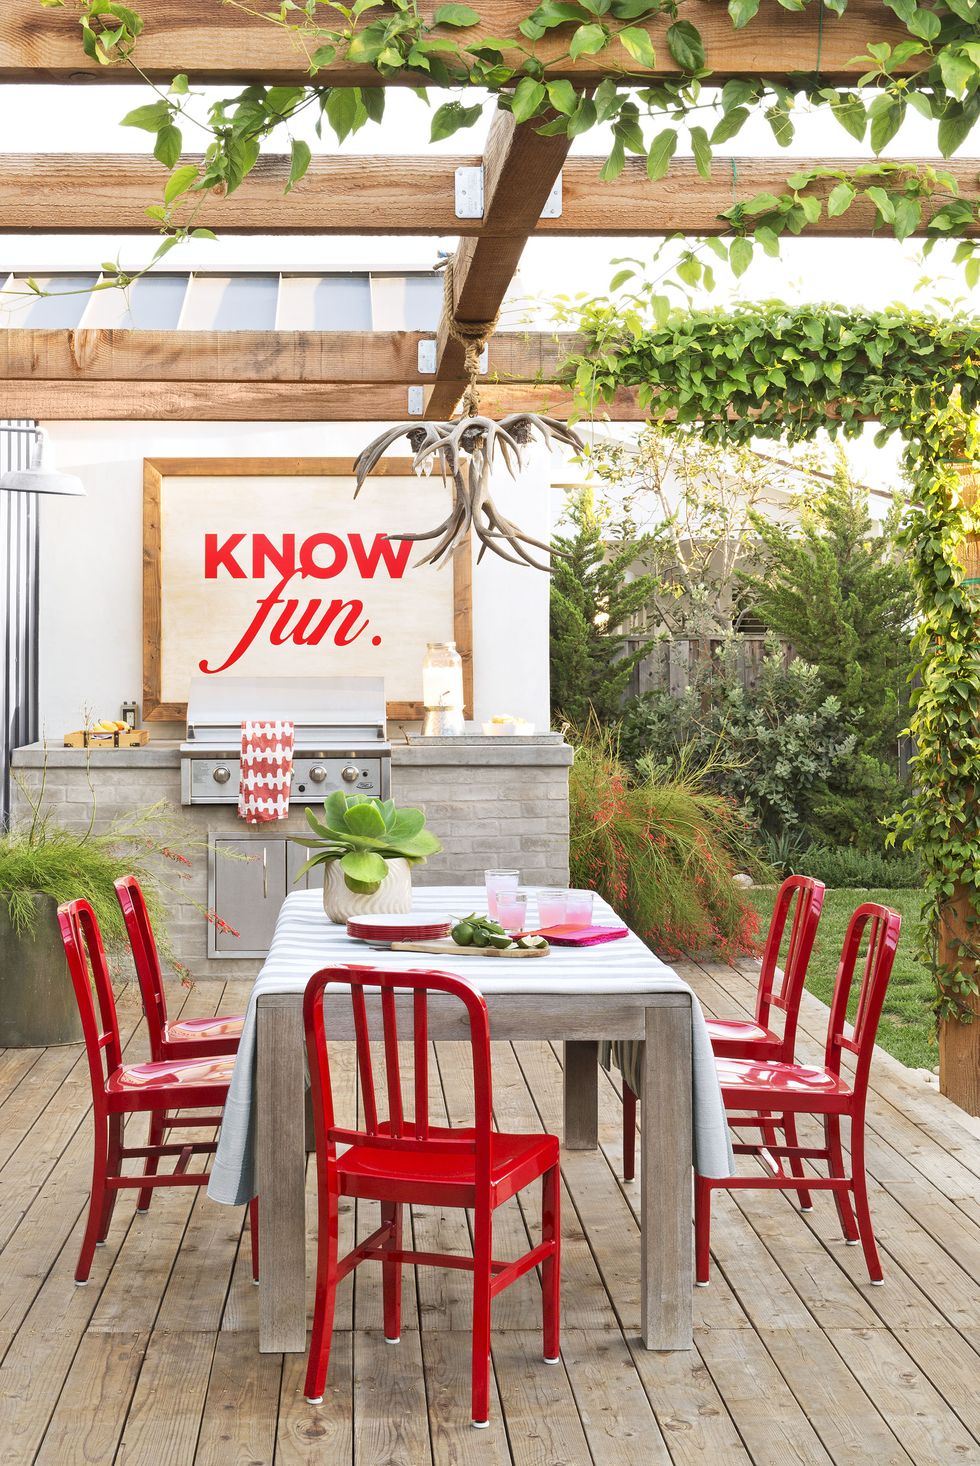 stone grill in a backyard with wood dining table and red chairs in outdoor kitchen ideas